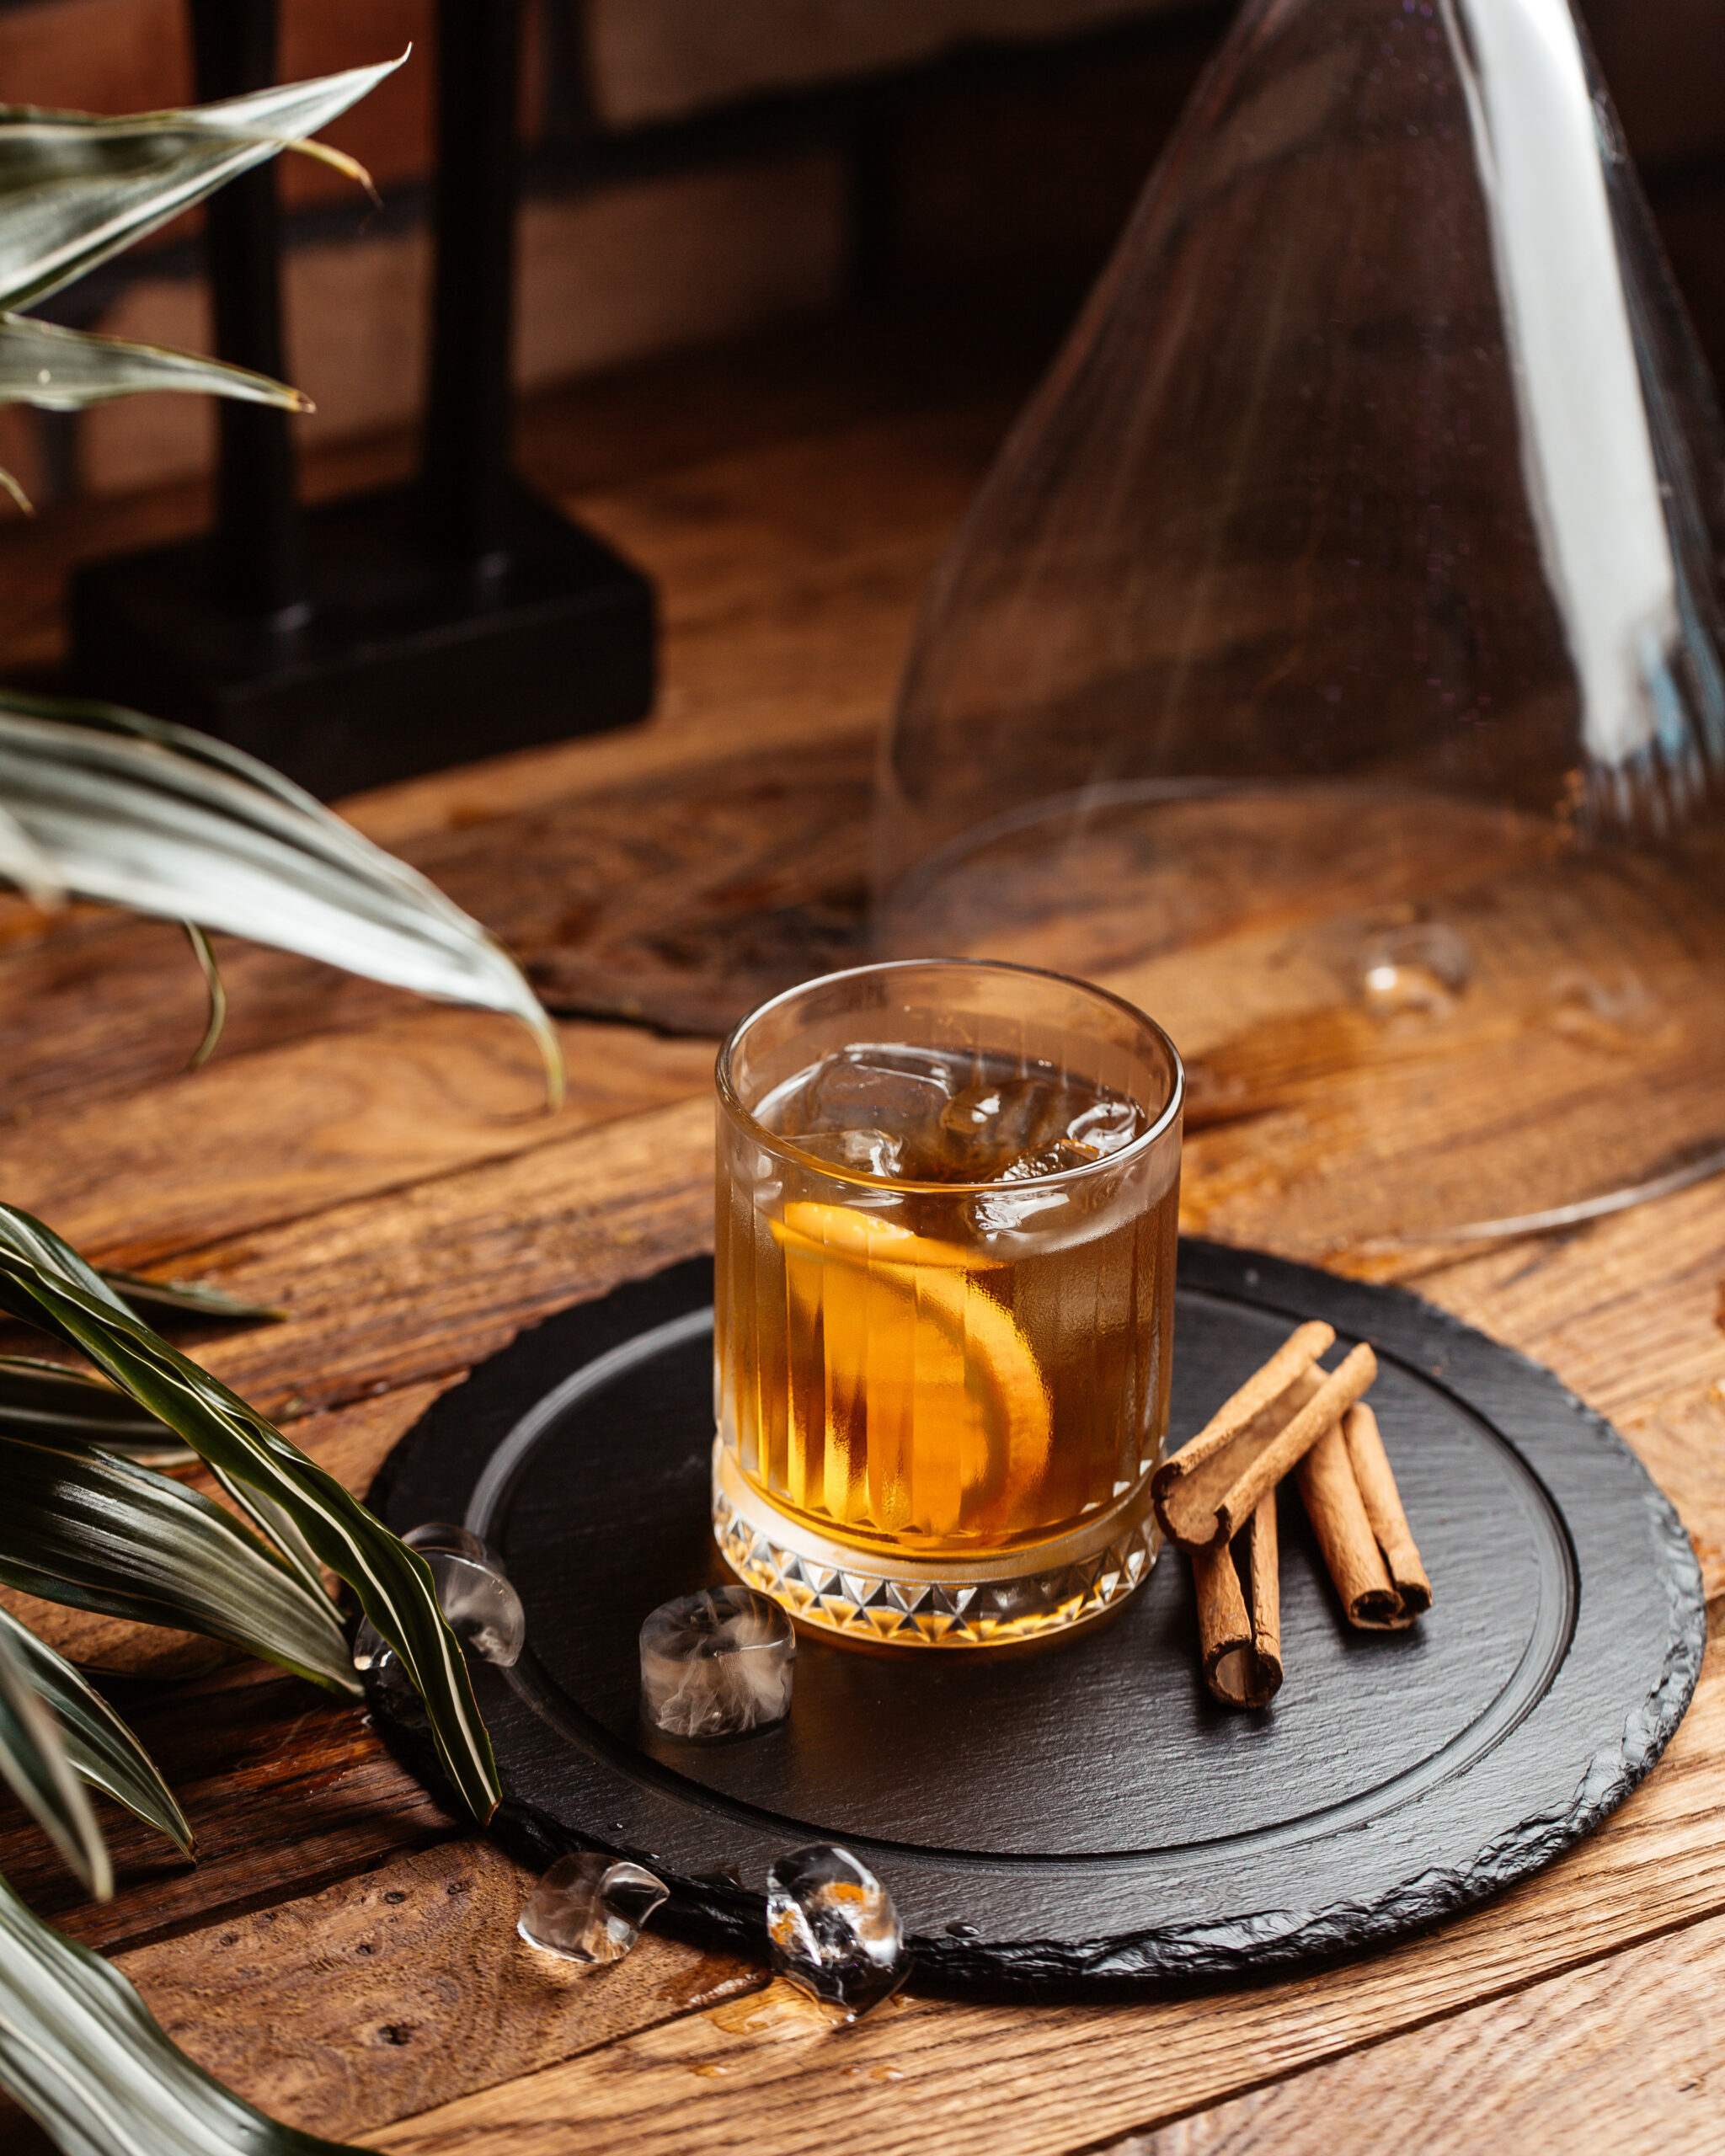 A glass of whisky drink called Old fashioned with cinnamon stick